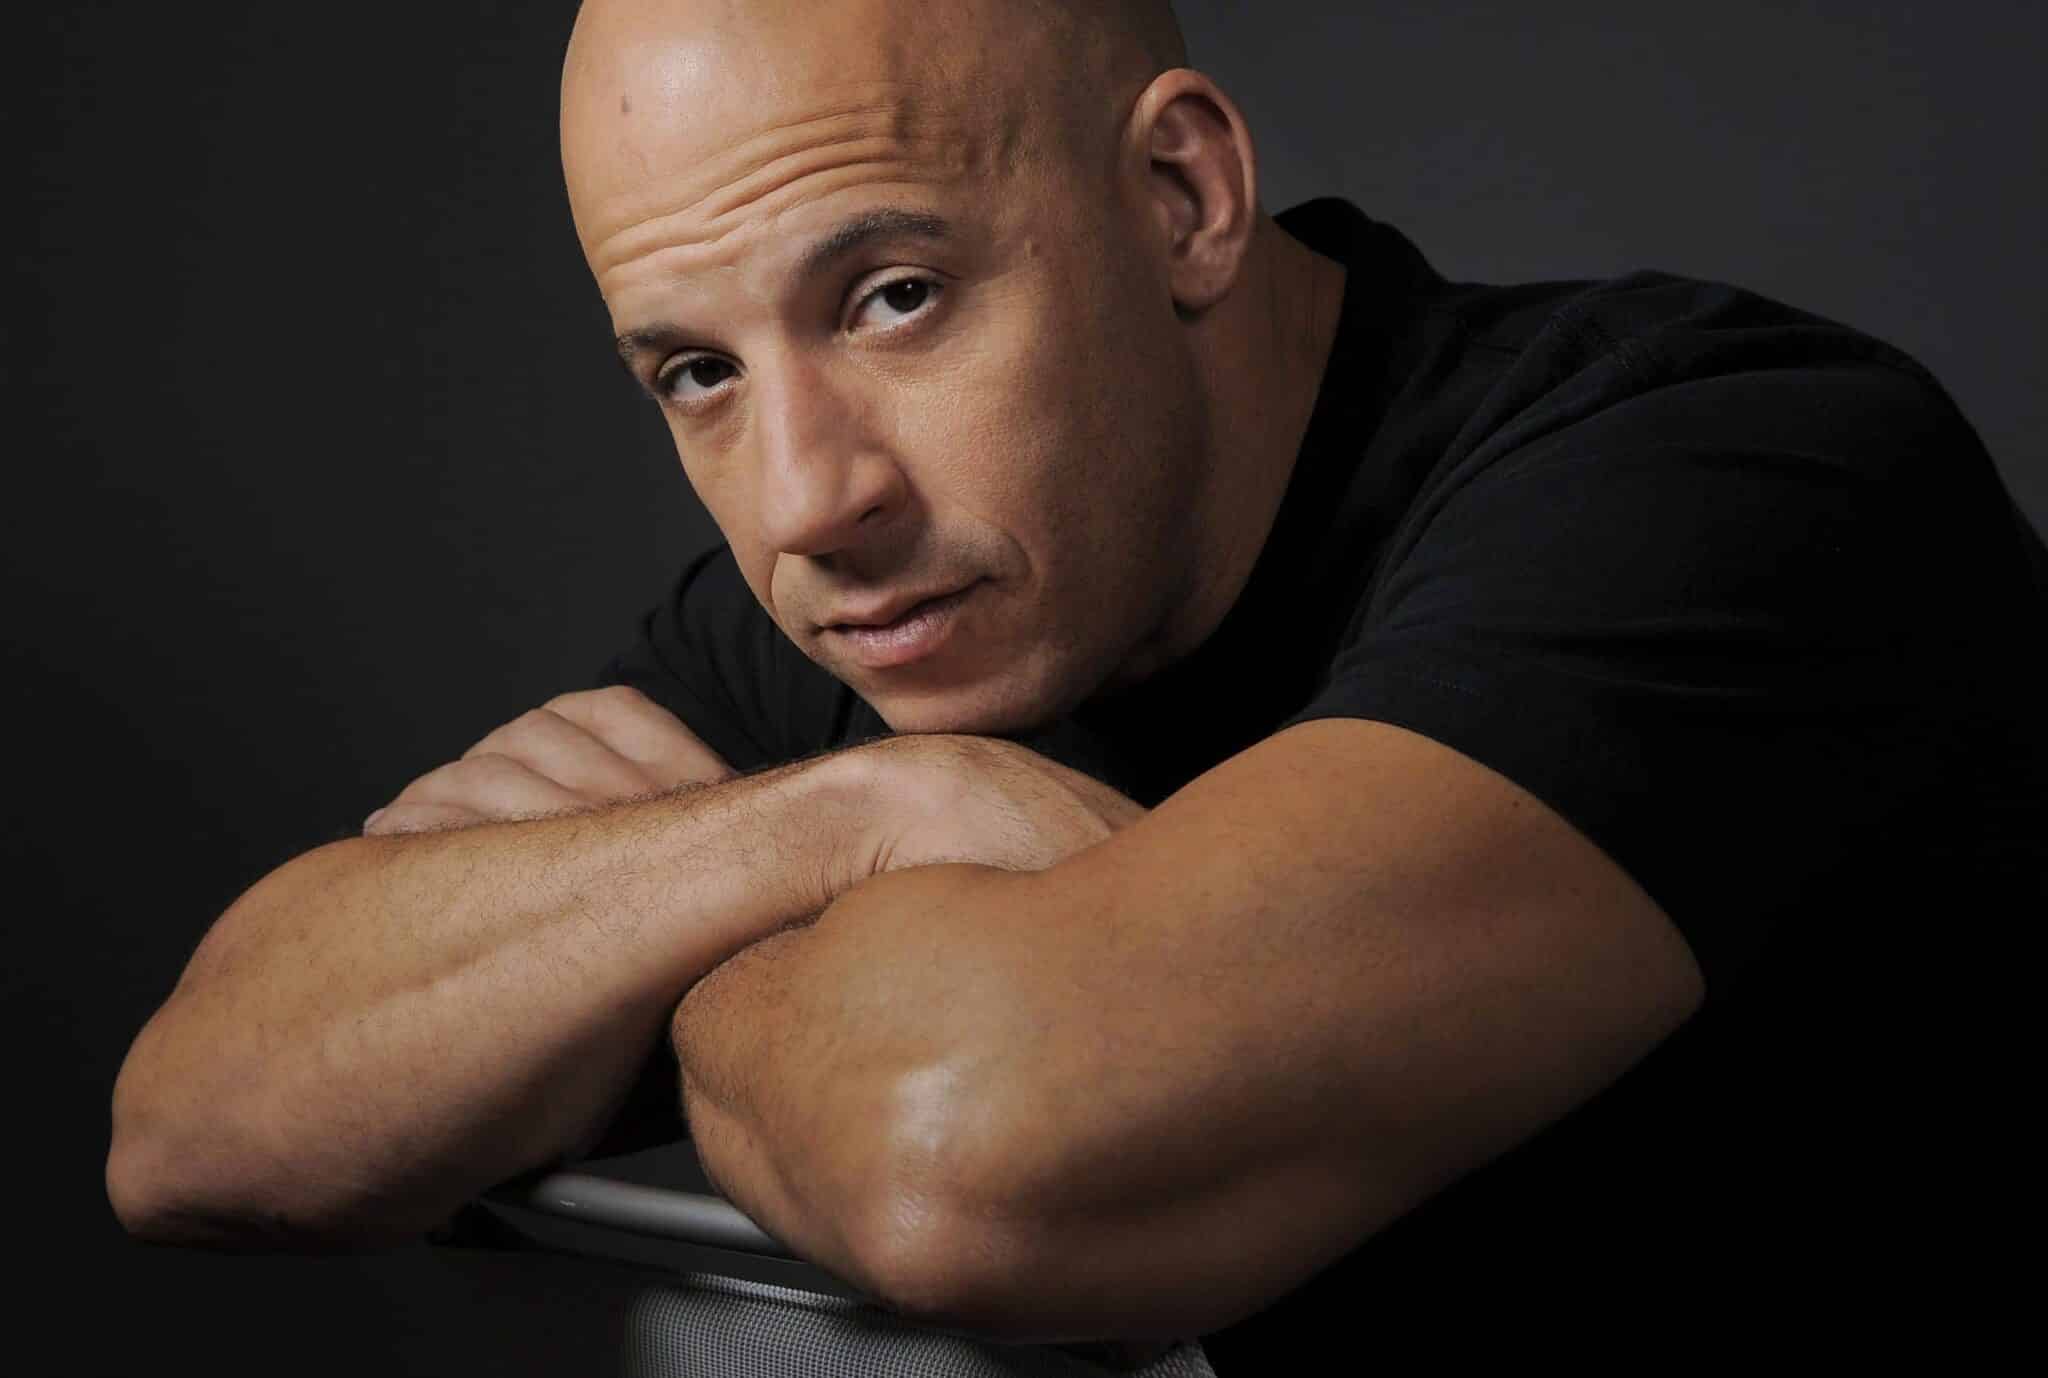 Prime 15 Finest Vin Diesel Motion pictures of All Time - Jual Domain PBN